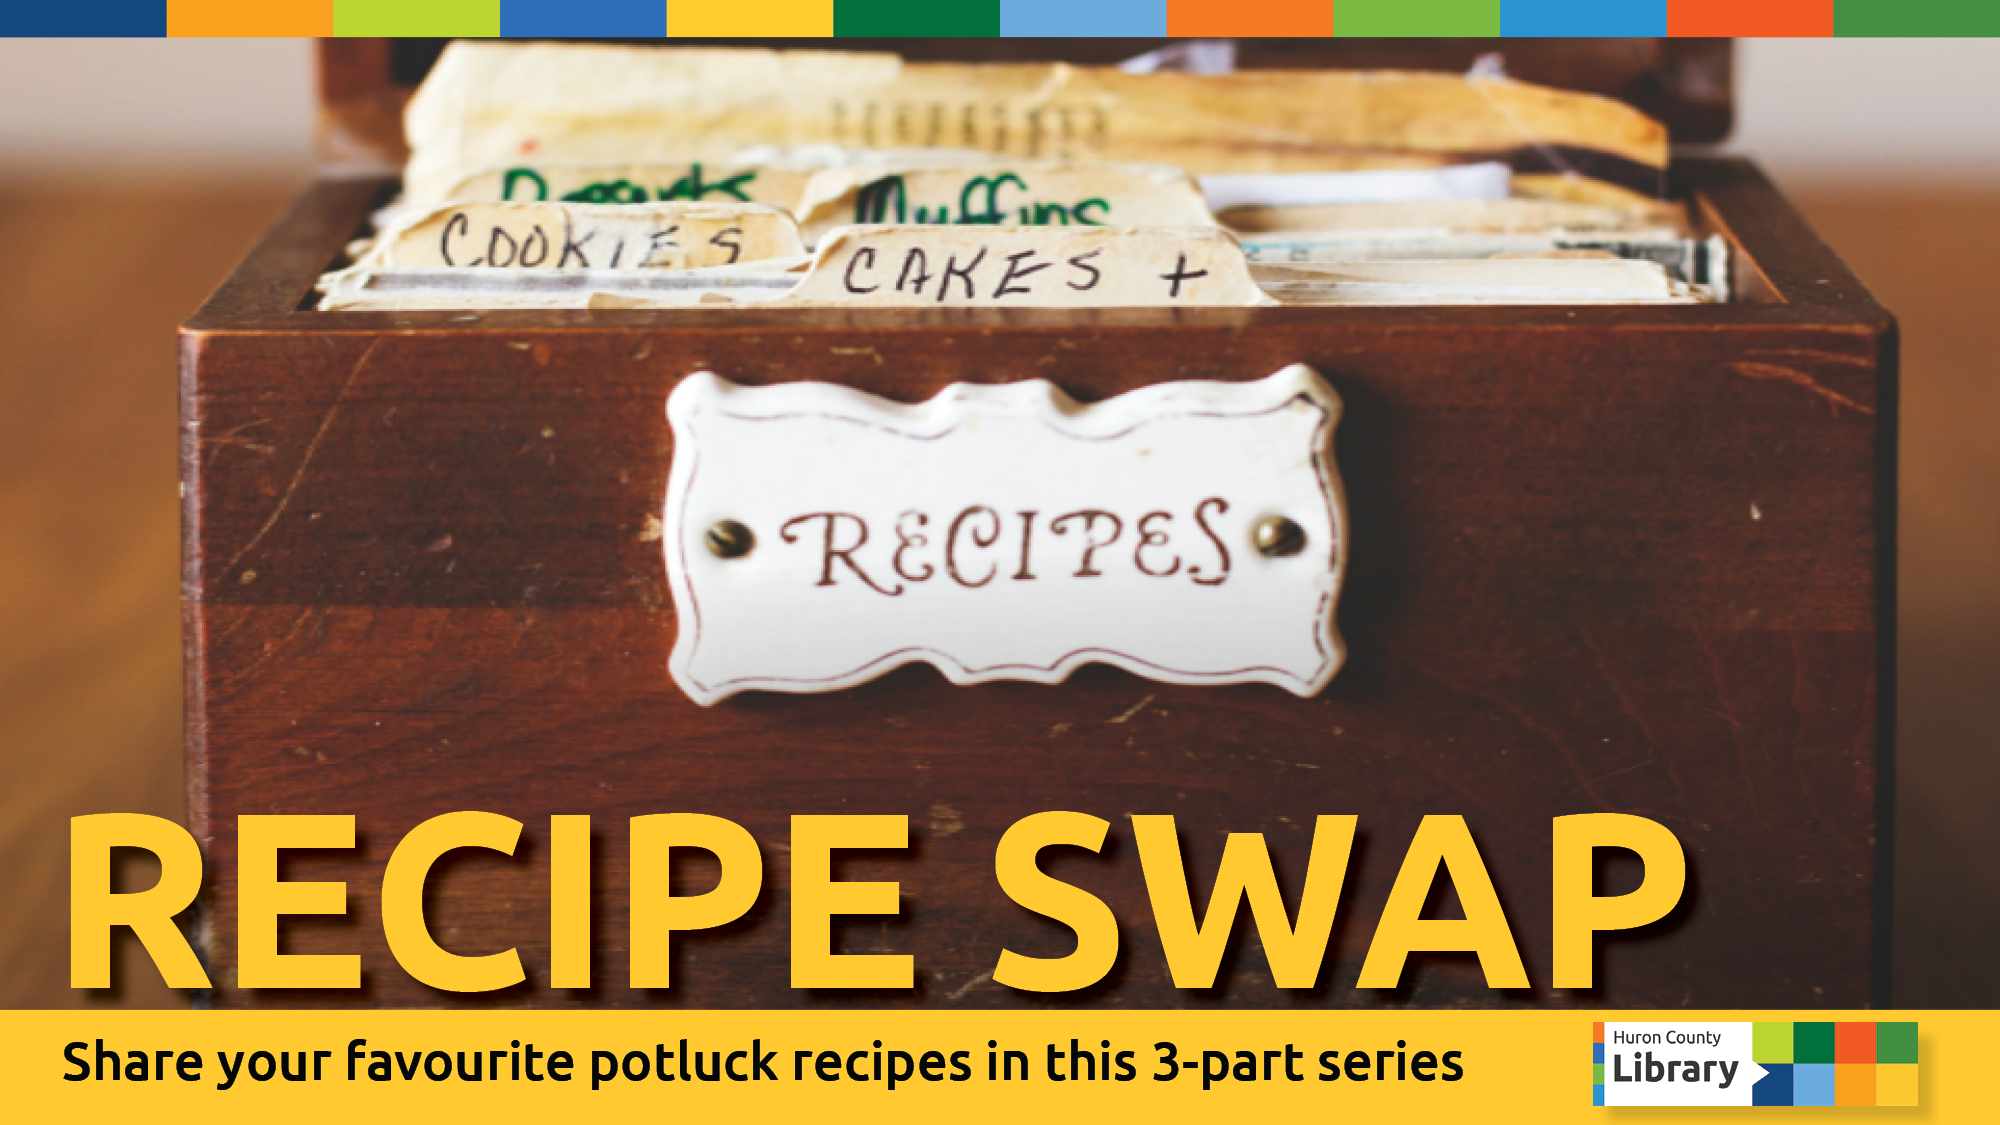 Image of a recipe box with text promoting potluck recipe swap